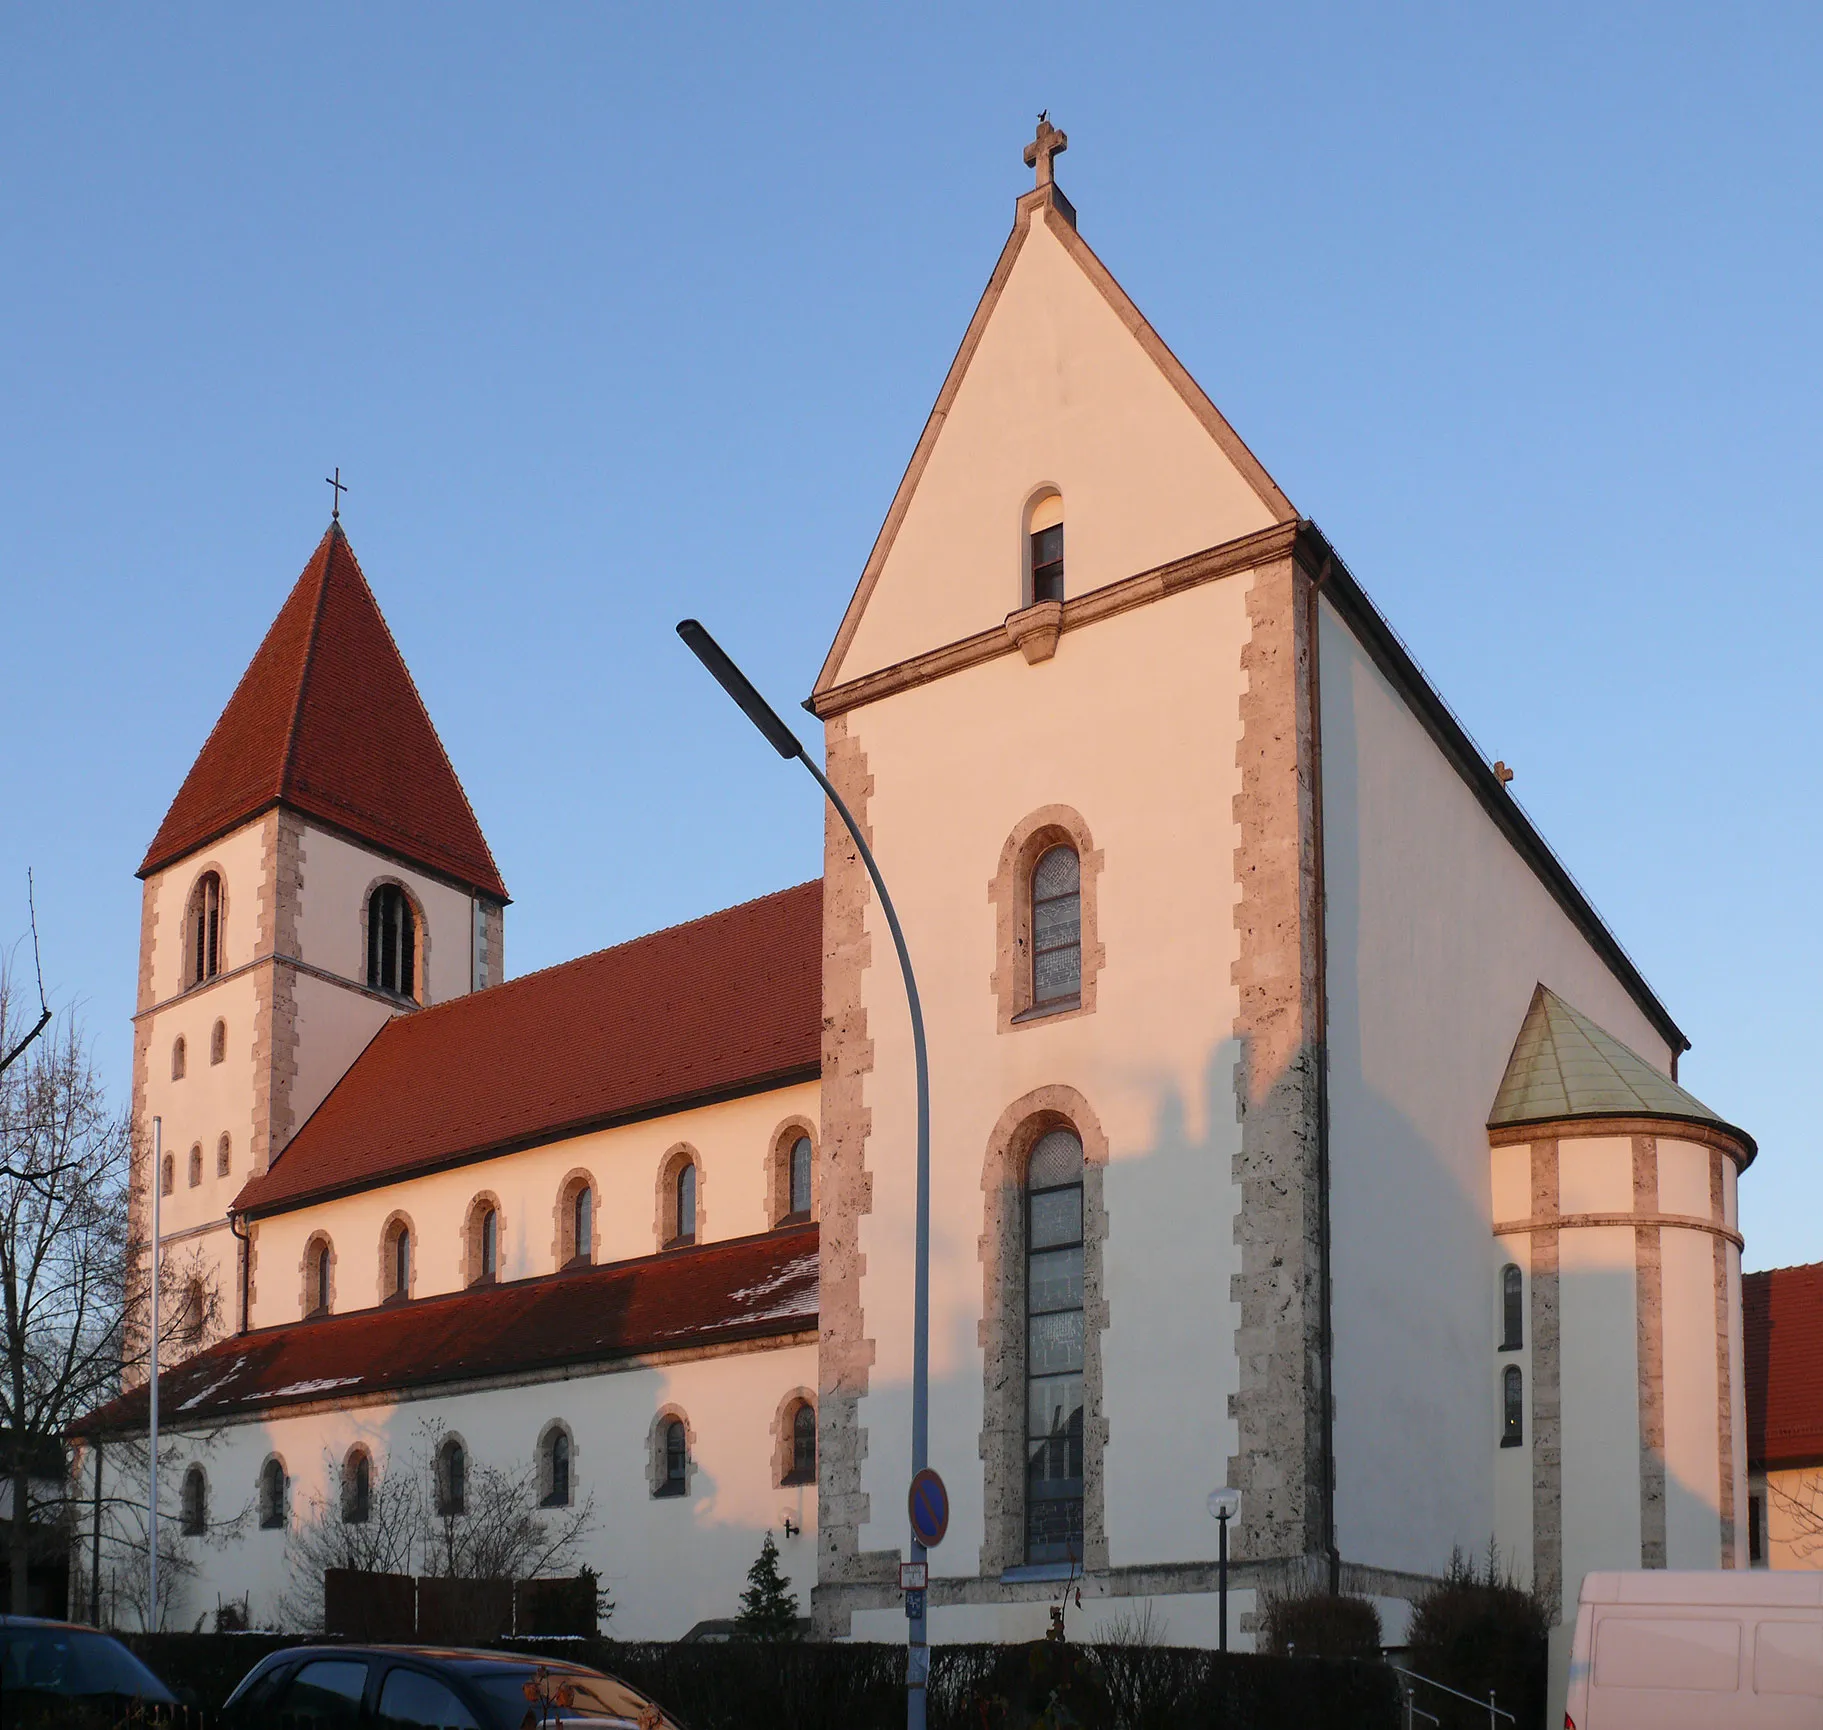 Photo showing: View of the Saint Albertus Magnus church in Oberesslingen (a district of Esslingen am Neckar, Baden-Württemberg, Germany), seen from the south side in the the light of a winter evening.